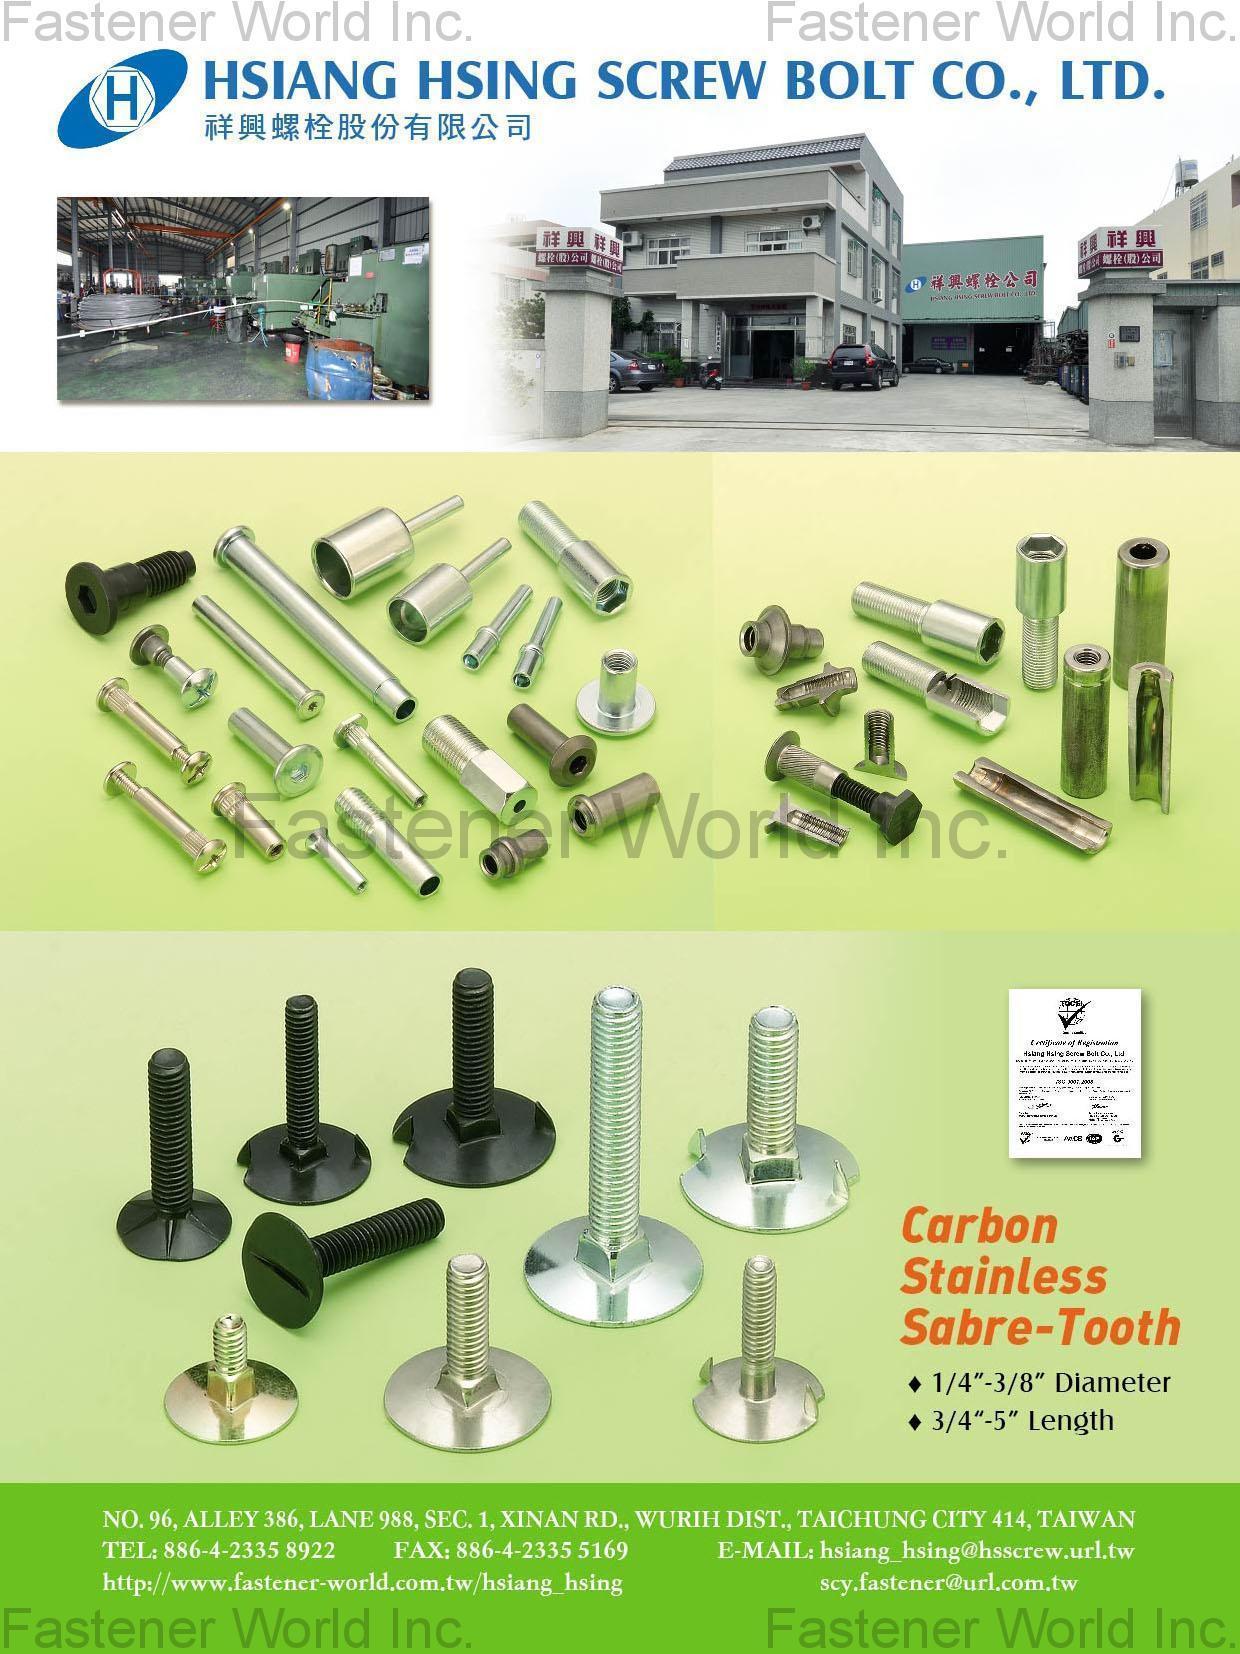 HSIANG HSING SCREW BOLT CO., LTD.  , Cold Forged Parts, Elevator Bolt, Screw For Furniture, Bolt & Amp. Nuts, Concrete Screw , Special Parts